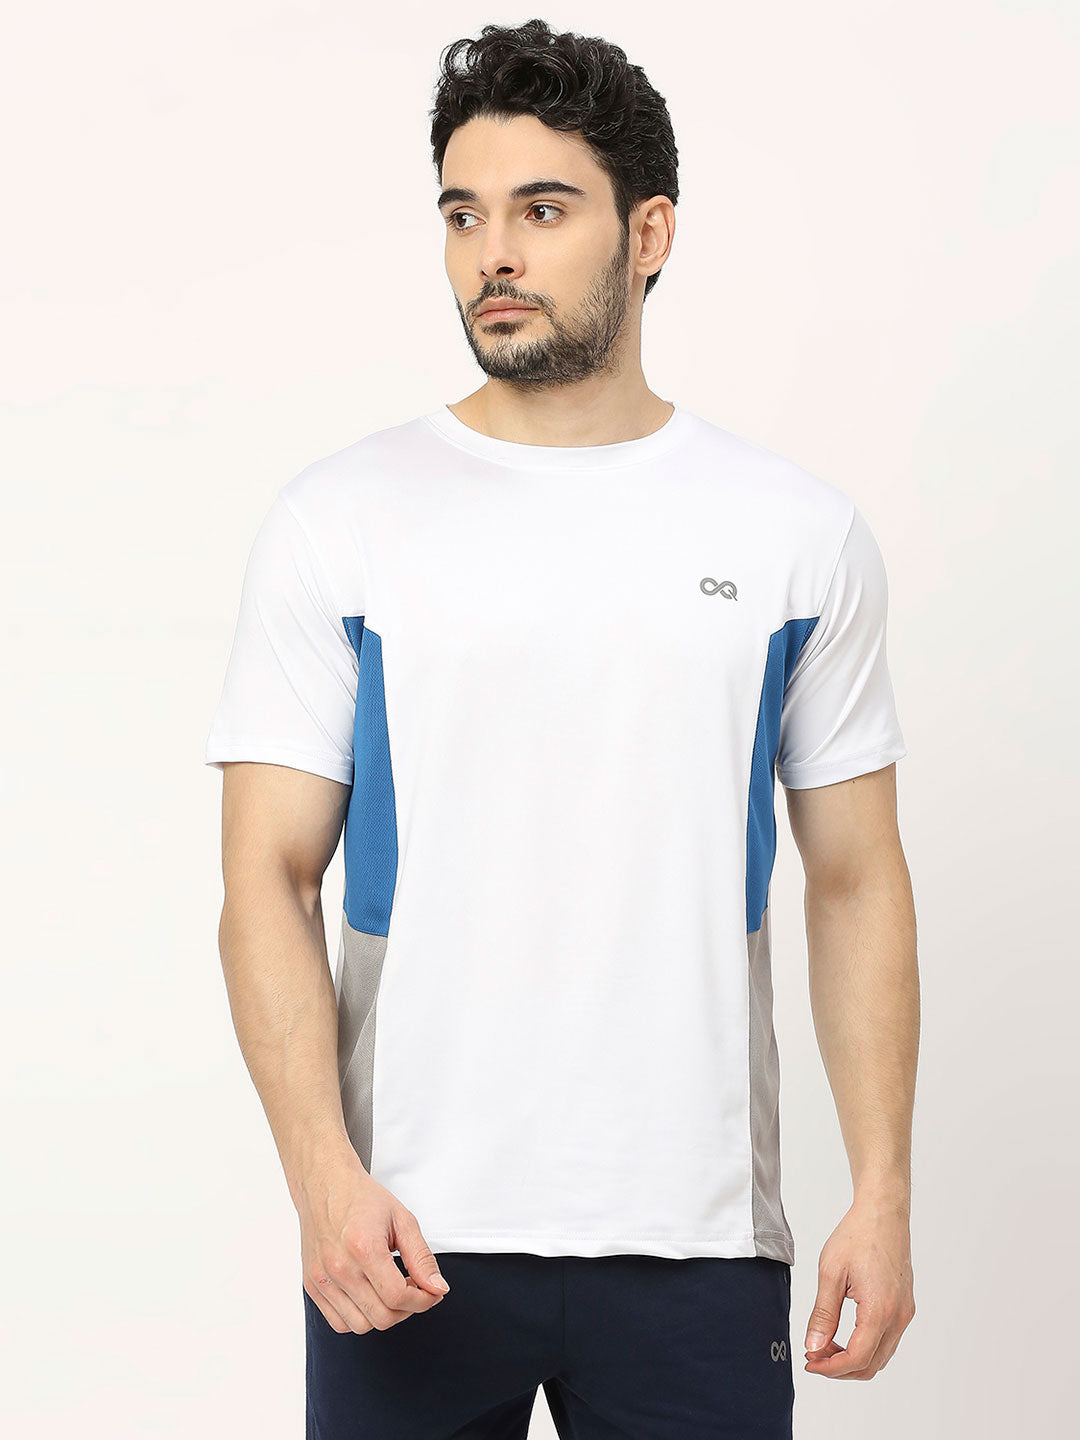 Shop Men's Long Sleeve White Sports T-Shirt - Stay Cool and Stylish on the  Field